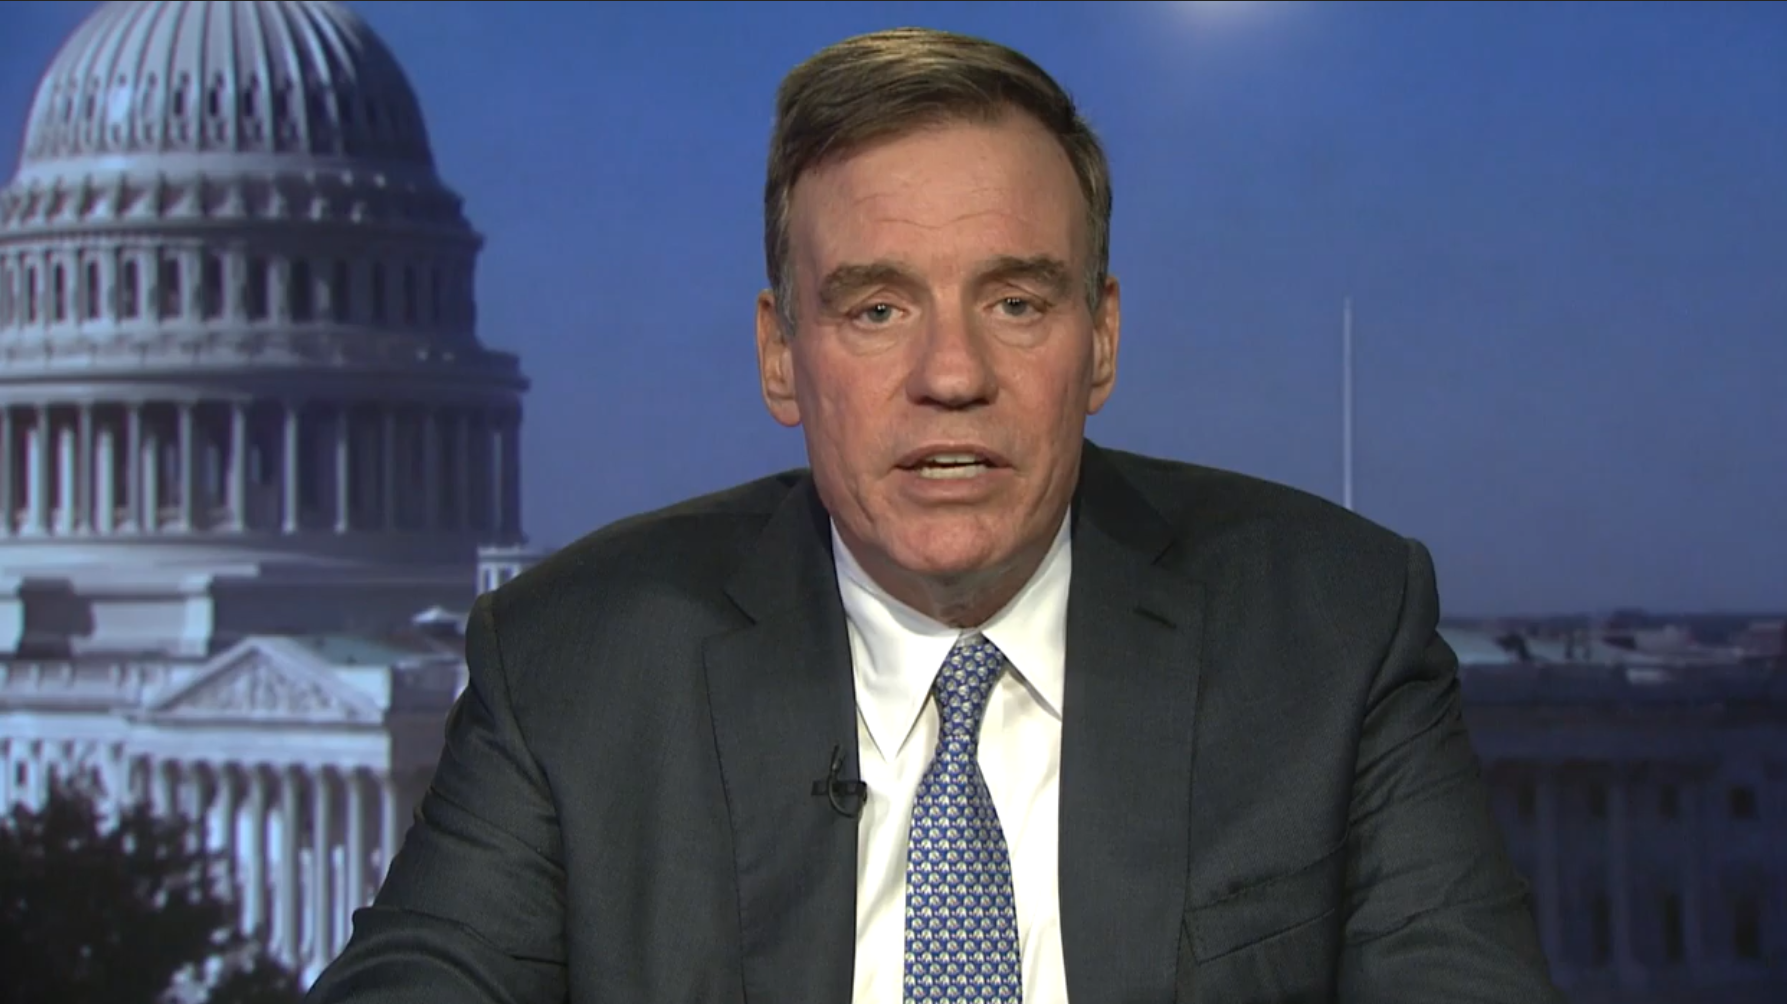 Back in 2008, Mark Warner assured voters that he would govern as a “centrist” if elected – and Virginians rewarded him with a decisive victory. In Washington, however, the now-senior senator from Virginia has been anything but moderate...